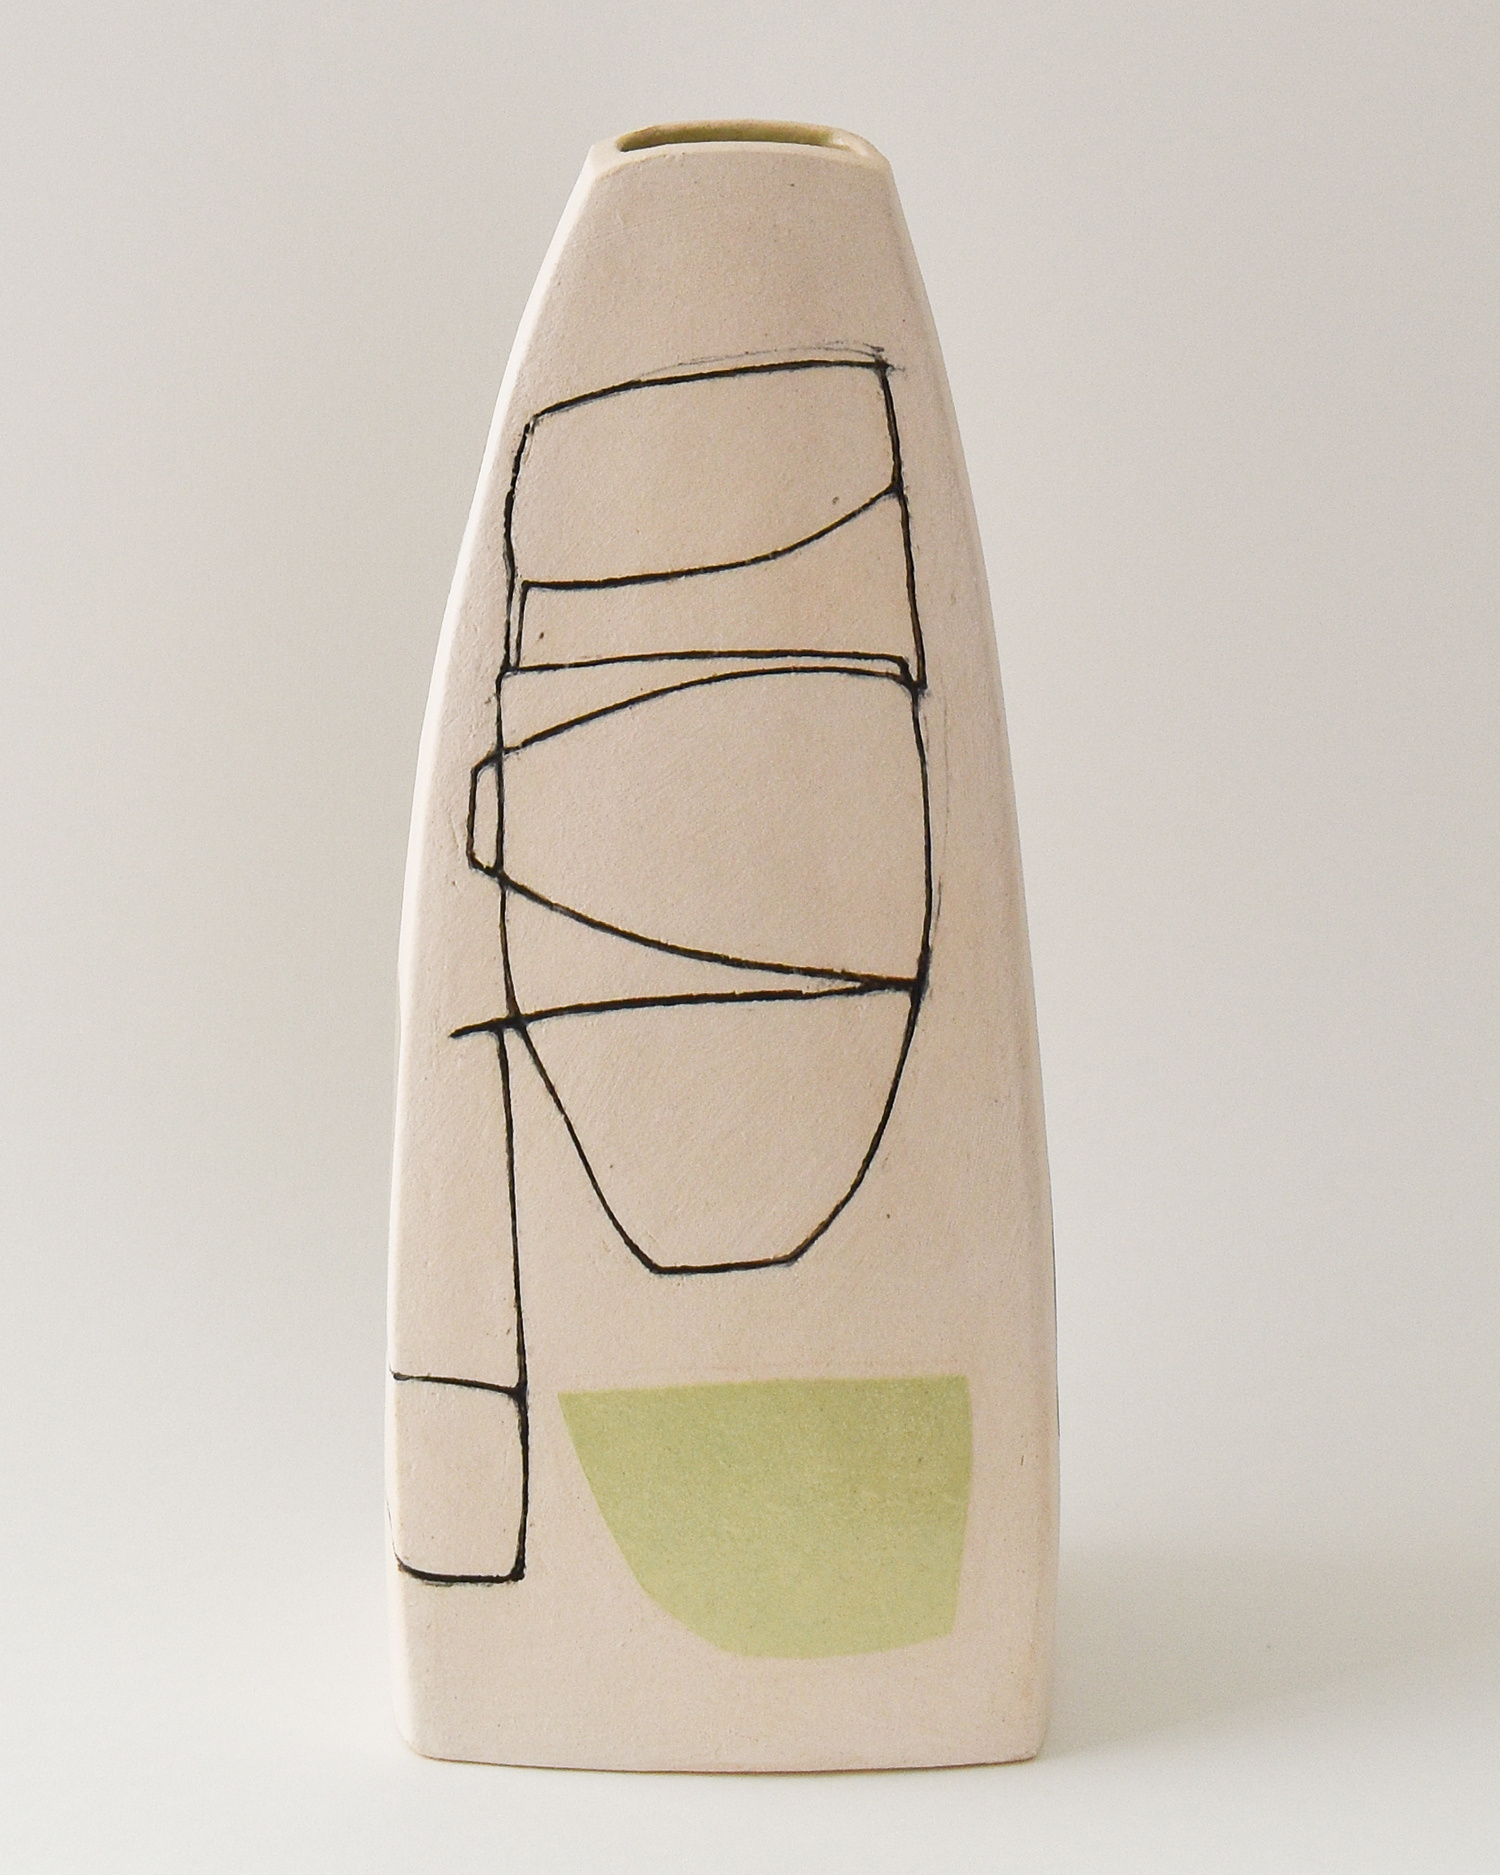 Tapered Vessel, narrow by Louise McNiff